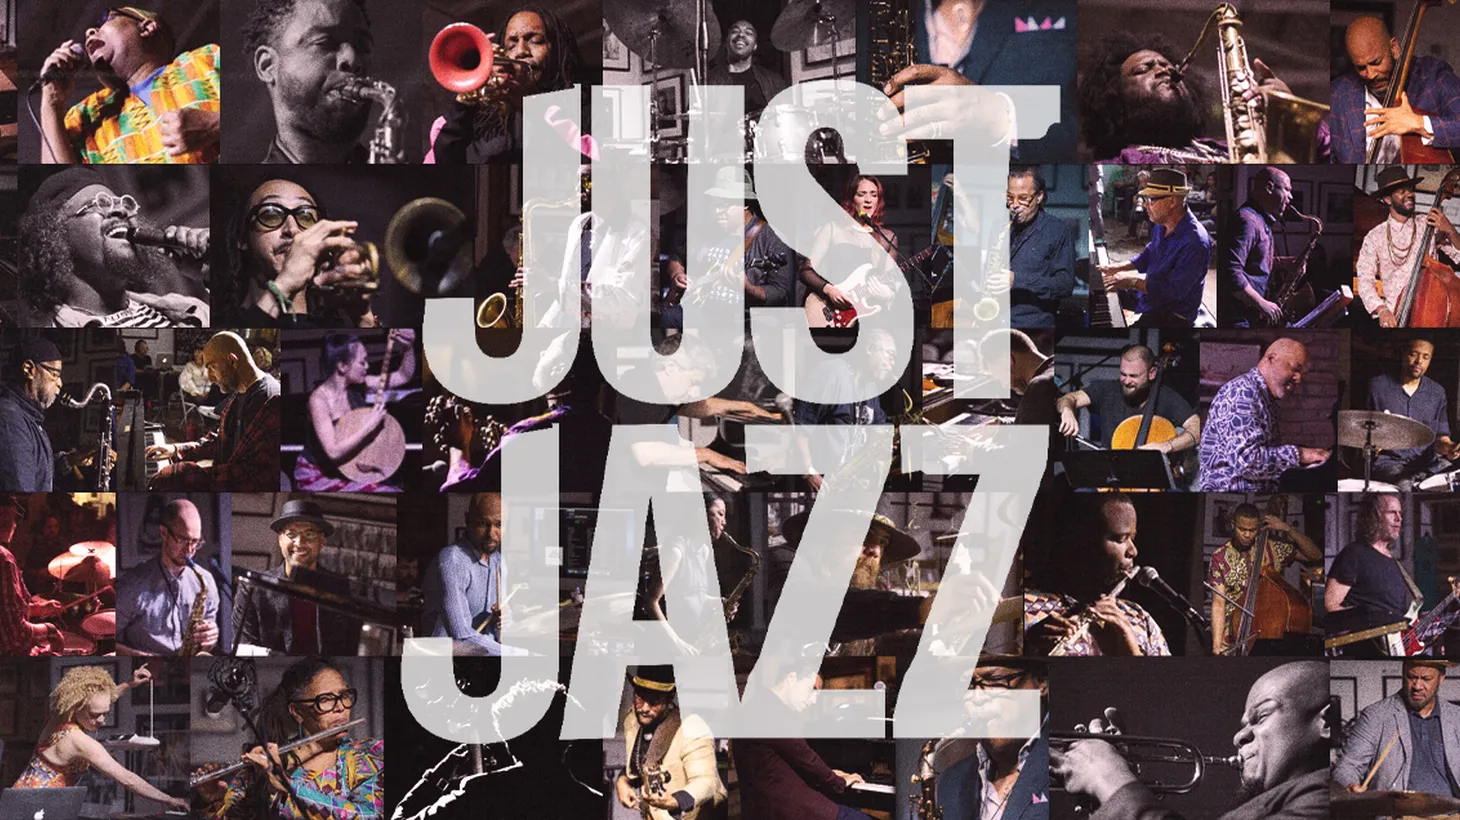 "Just Jazz" with LeRoy Downs. Downs' goal is to bring a varied sonic experience to jazz, while blending music, style, and culture.